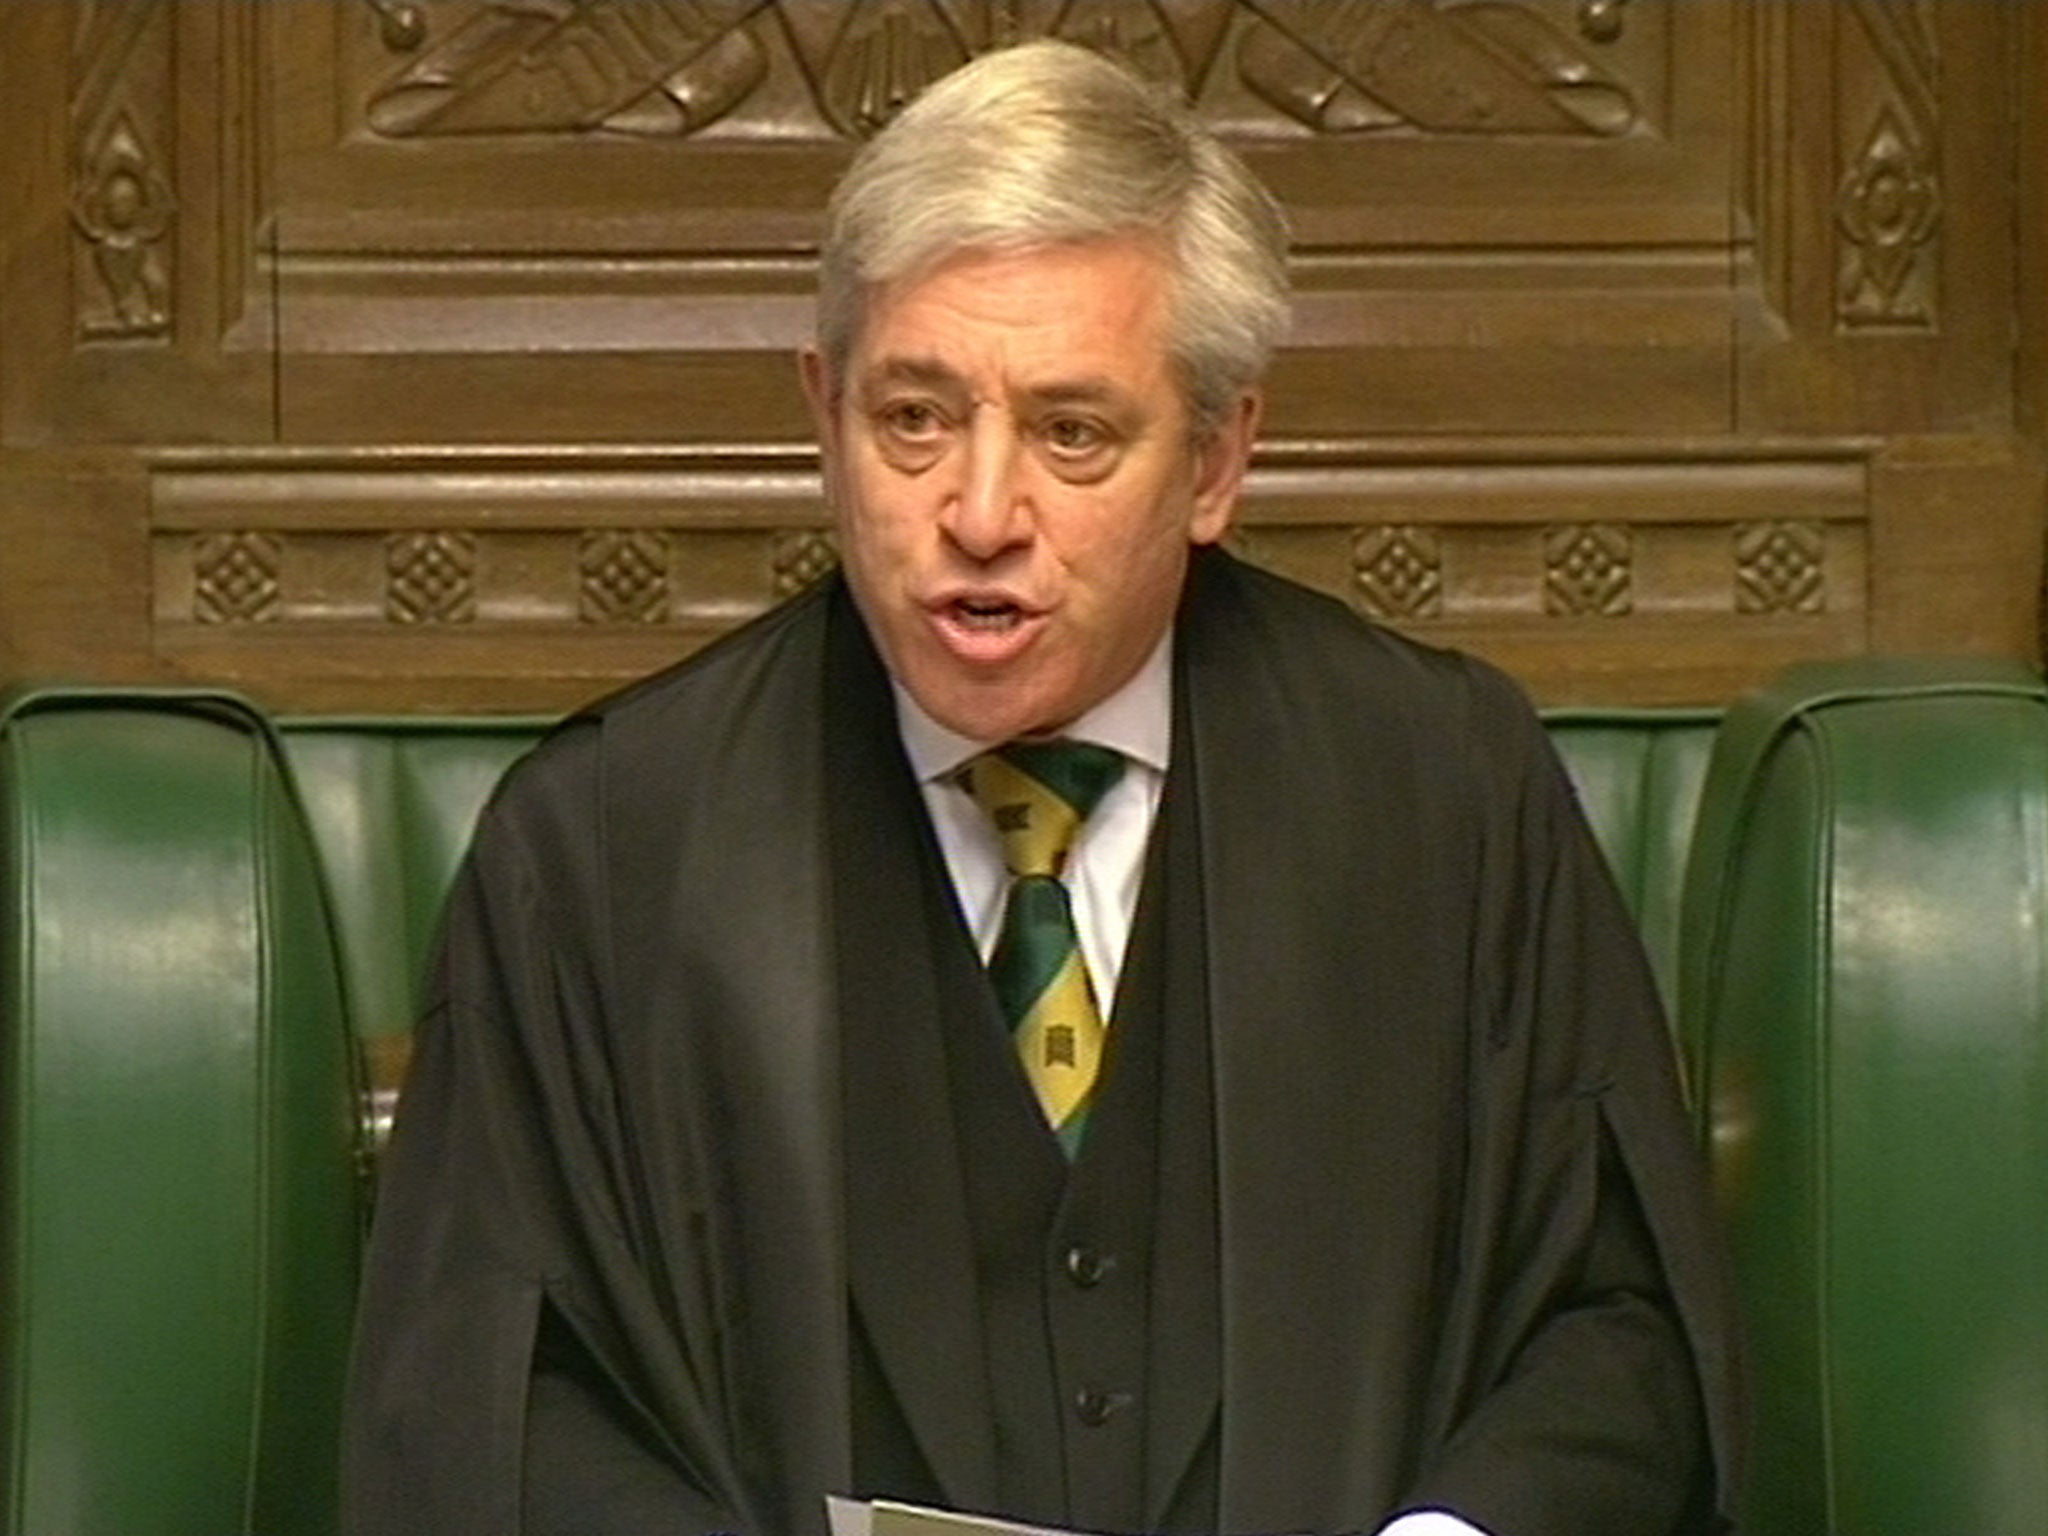 Speaker of the House of Commons John Bercow speaks at the opening of the debate in the House of Commons on extending the bombing campaign against Islamic State to Syria